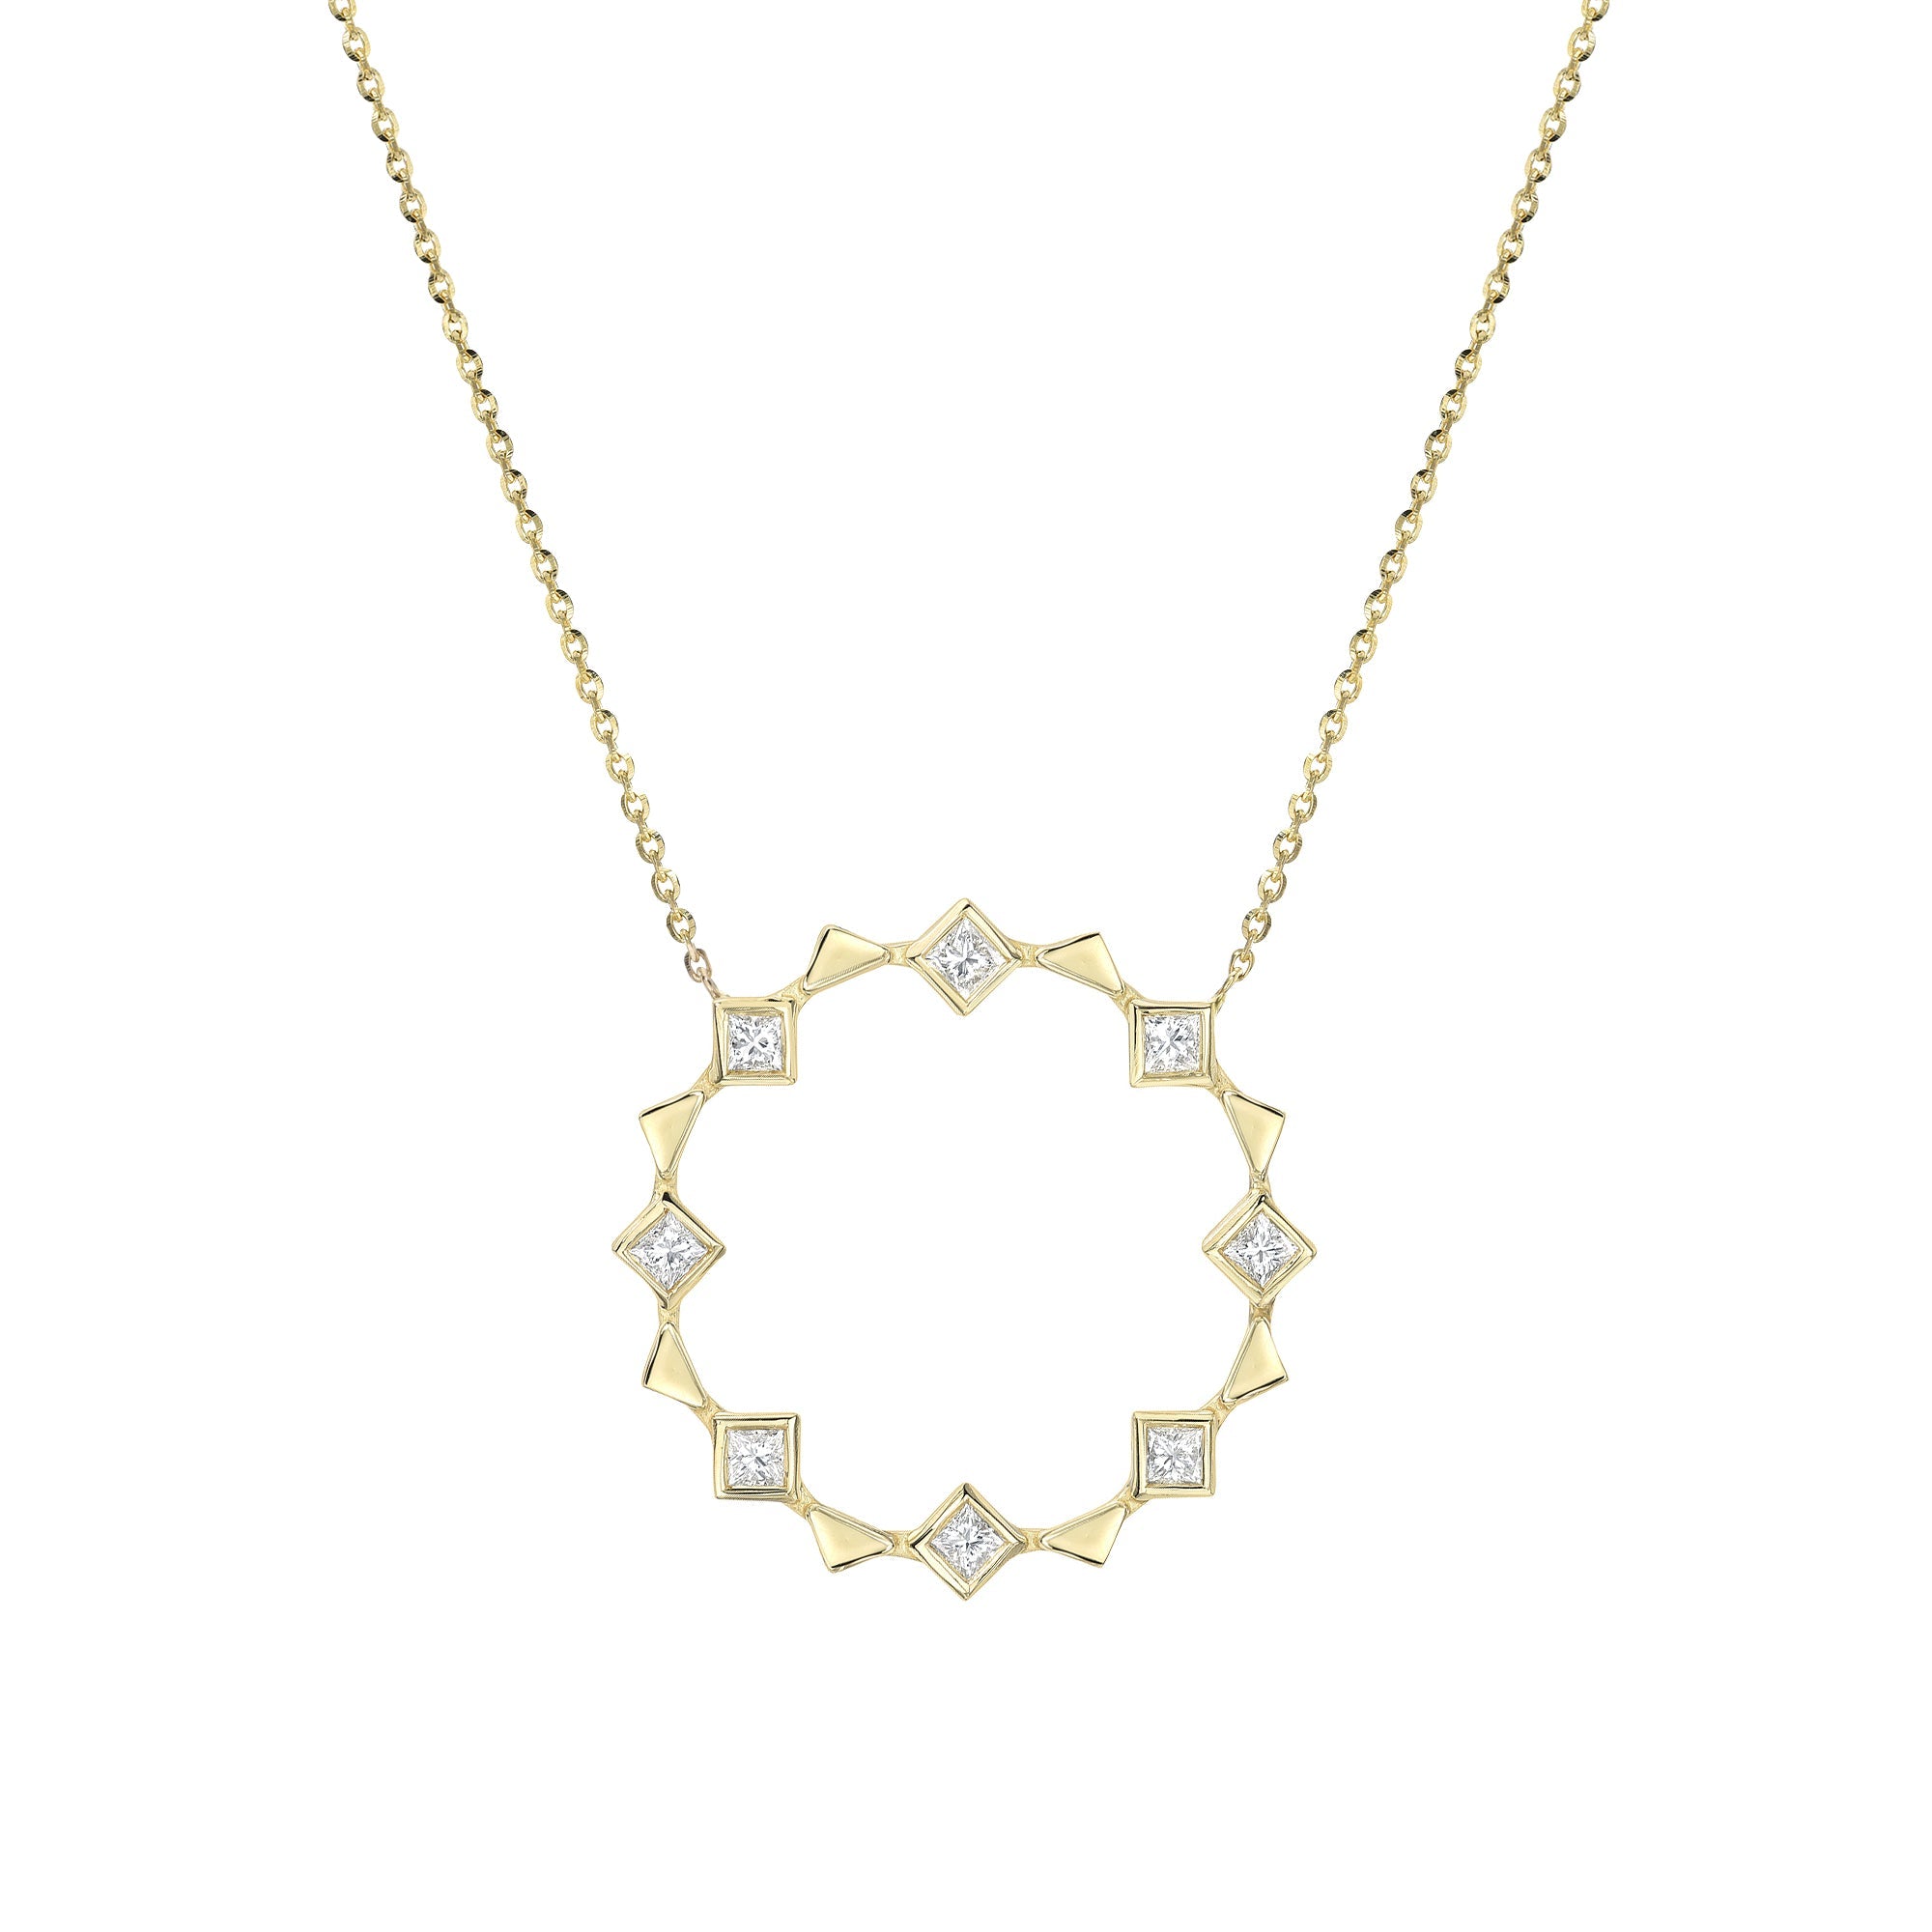 Meet the Open Circle Energy Necklace by Meredith Young, available at Talisman Collection Fine Jewelers in El Dorado Hills, CA and online. ! This lovely piece showcases a playful arrangement of .56 cts of white princess diamonds, dancing alongside 18k gold triangles. The pendant's diameter extends to over 1 inch, and it offers an adjustable length, so you can wear it comfortably at 16 to 18 inches. It's a perfect choice for adding a touch of sparkle to any day.